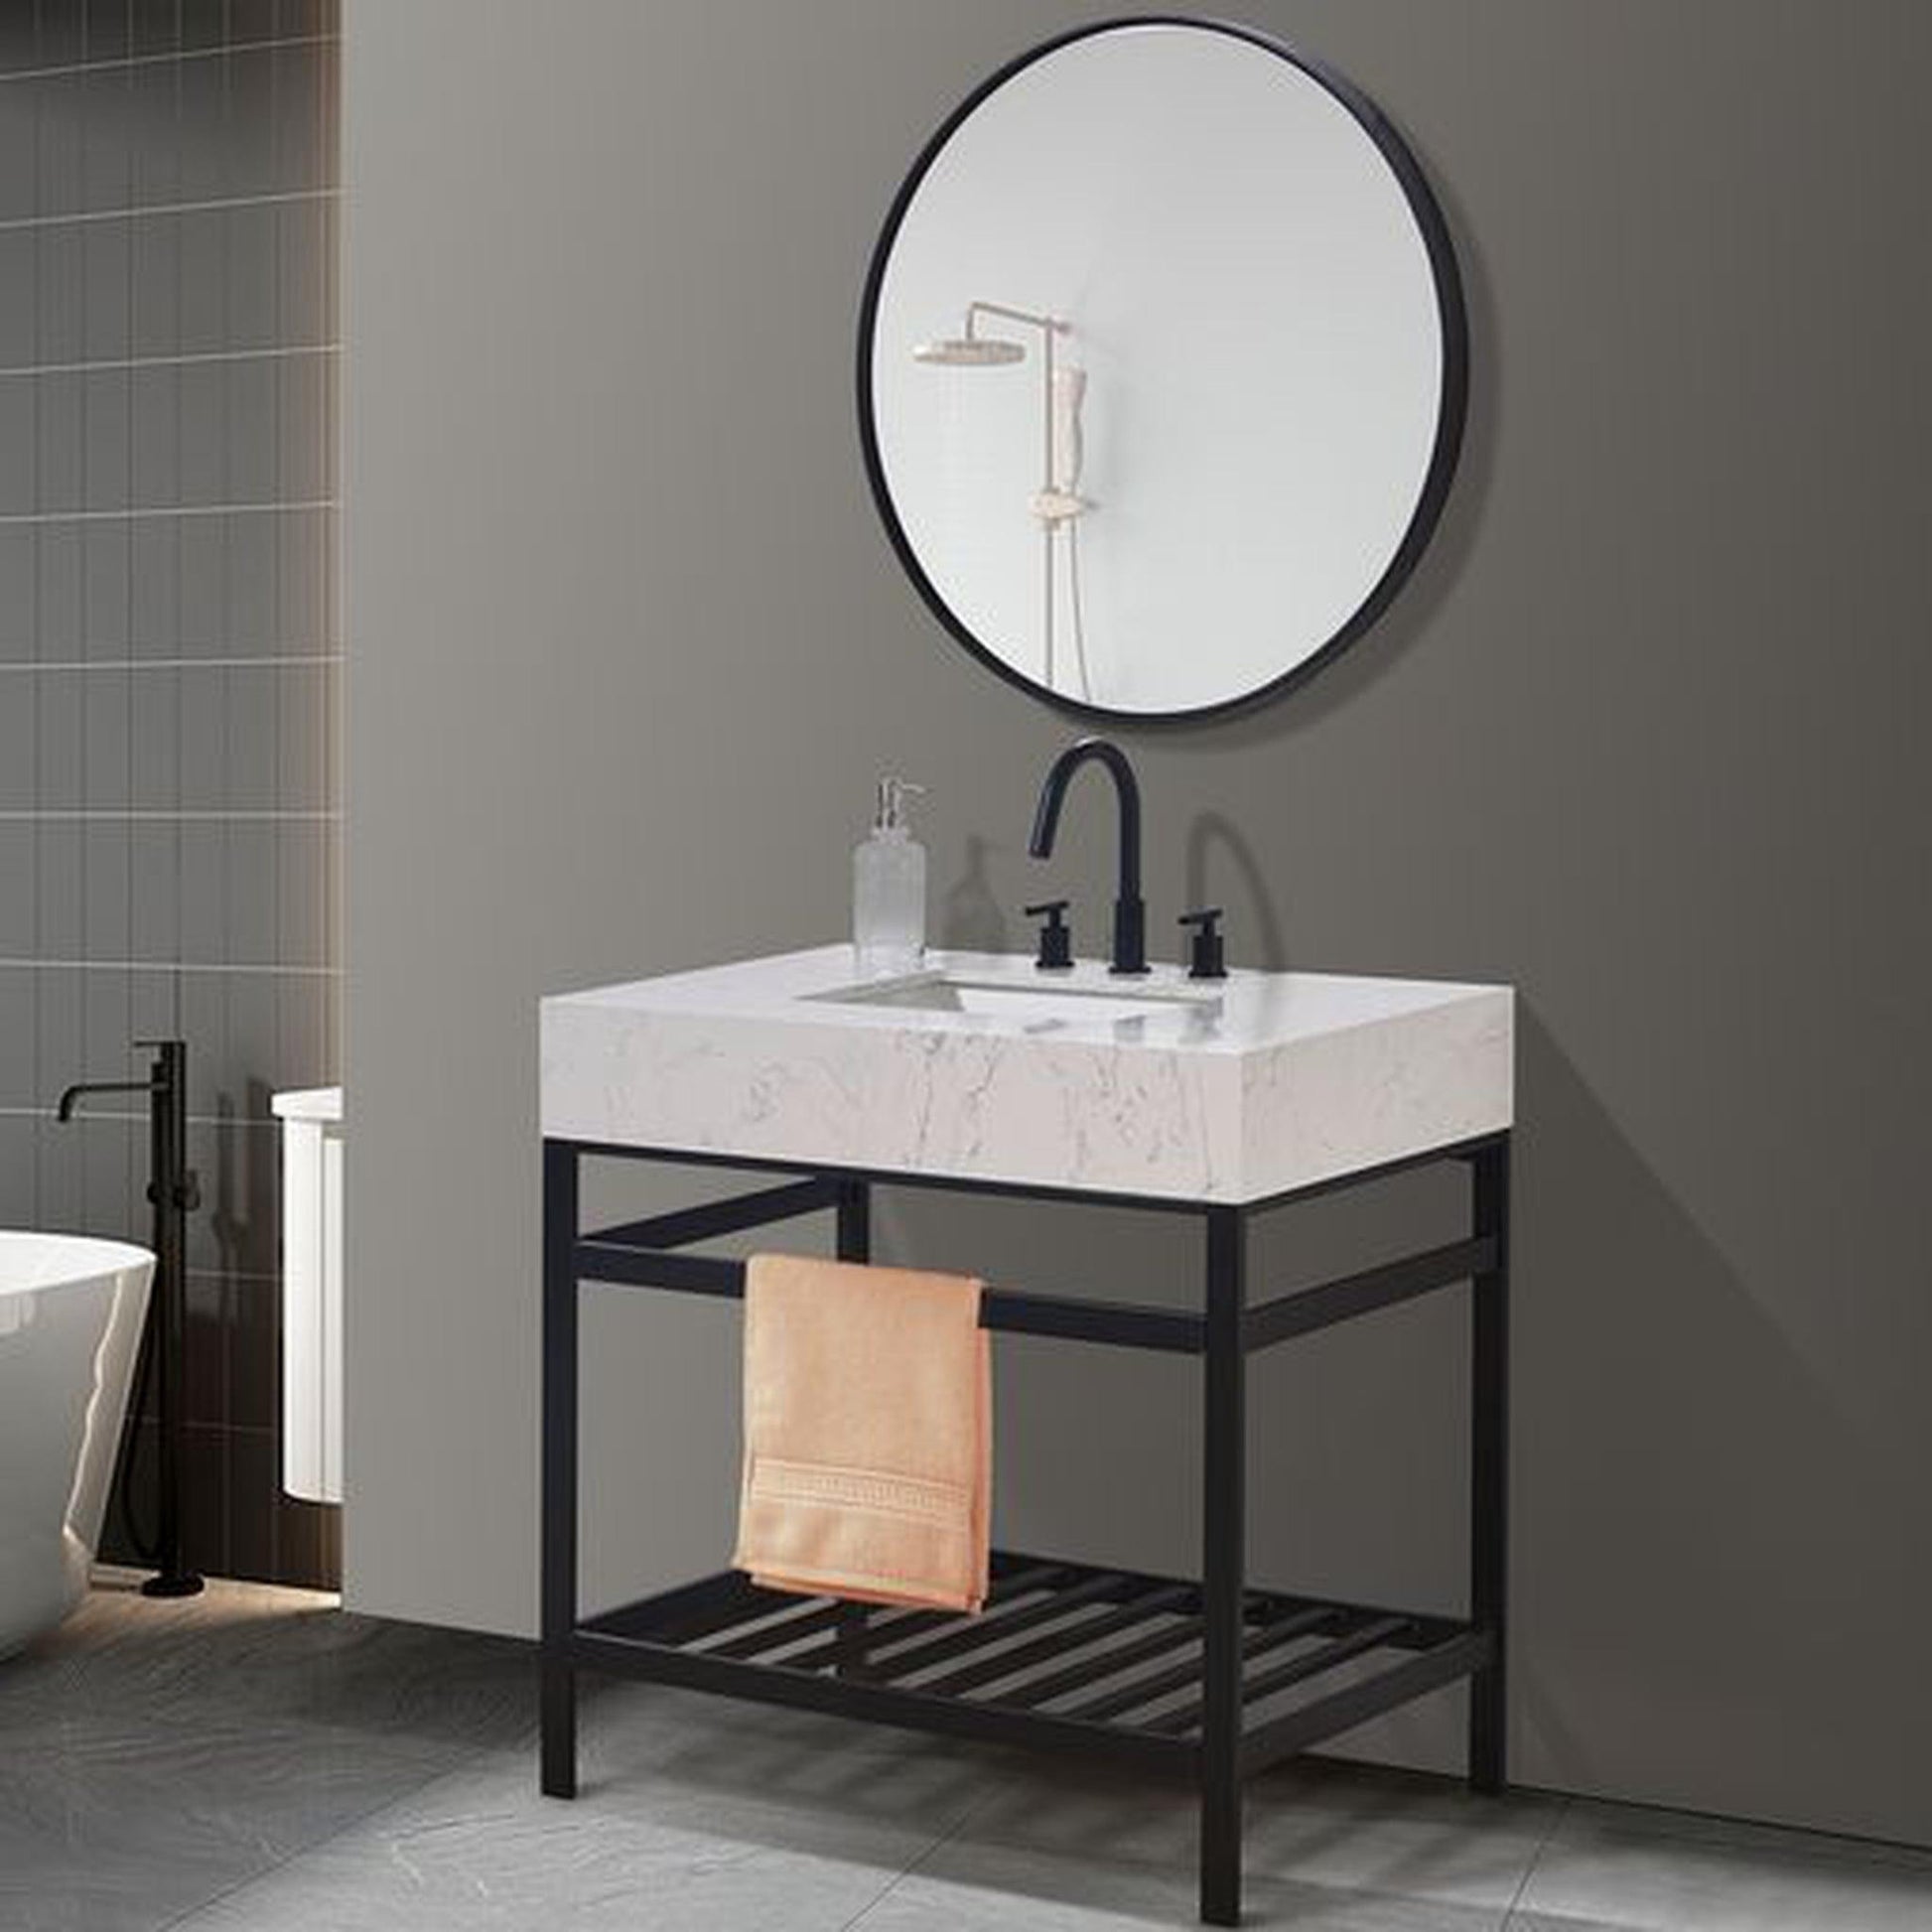 Altair Merano 36" Matte Black Single Stainless Steel Bathroom Vanity Set Console With Mirror, Aosta White Stone Top, Single Rectangular Undermount Ceramic Sink, and Safety Overflow Hole